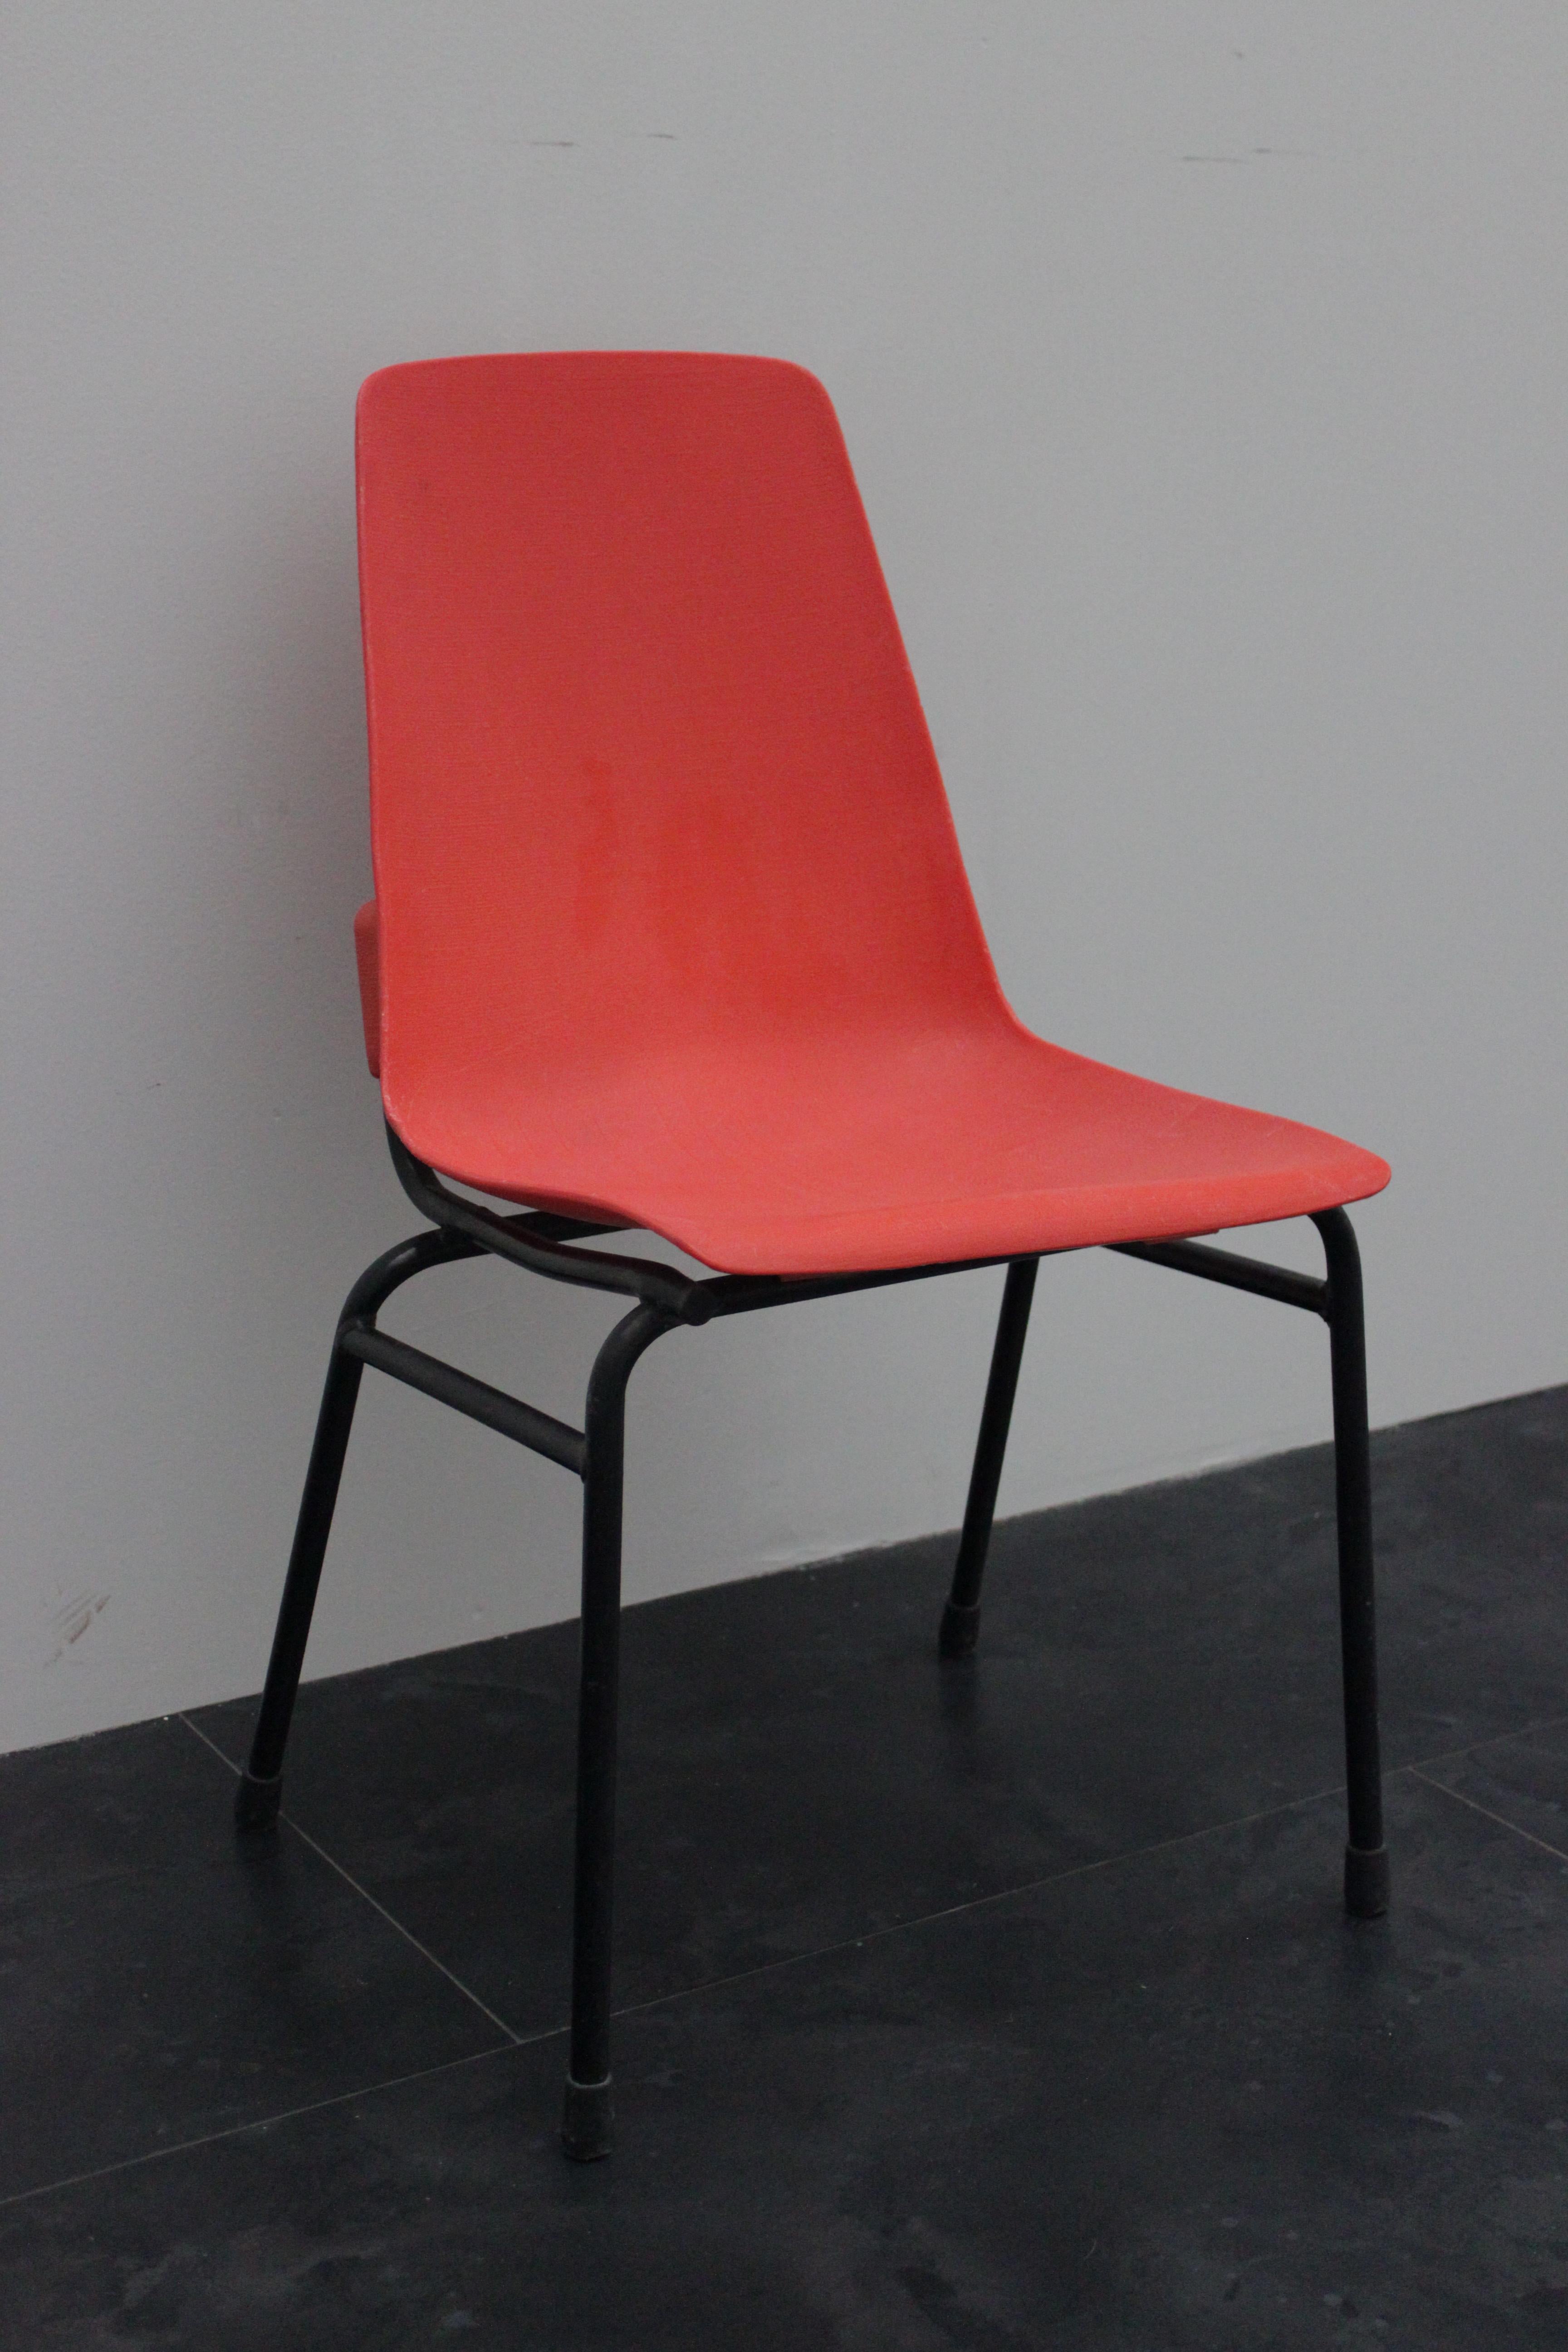 Woven Plastic and Metal Frame Fantasia Chair, 1960s For Sale 4